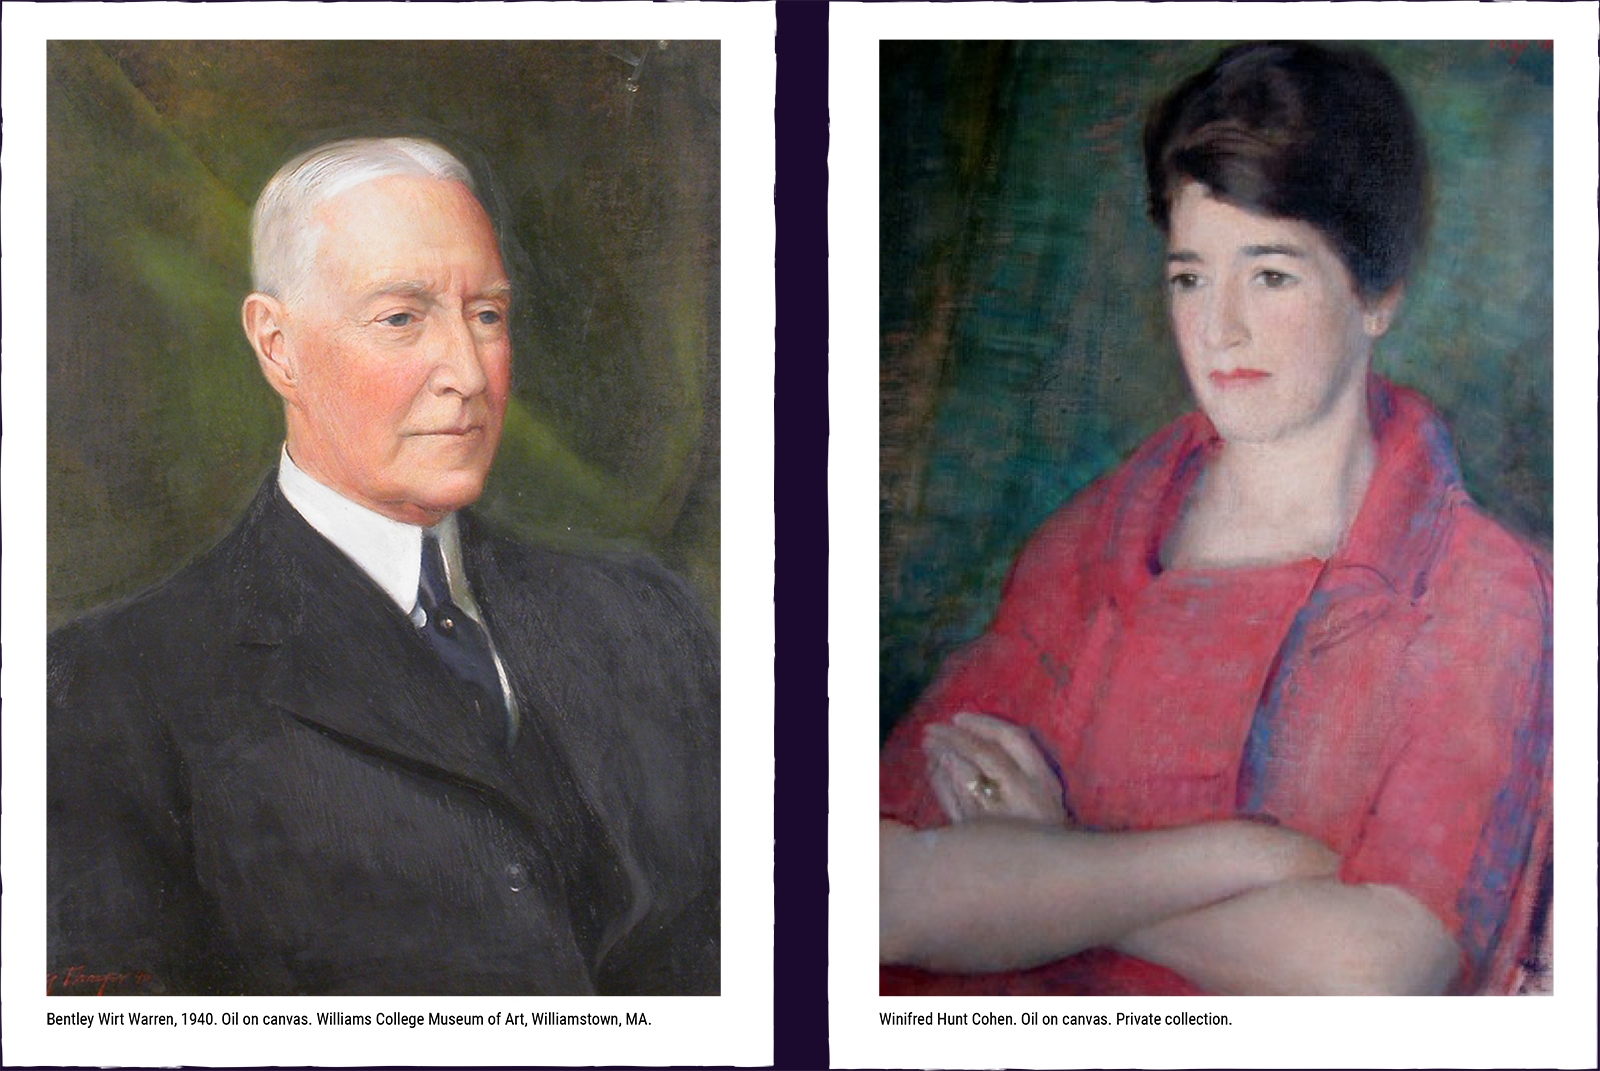 Two portrait paintings. (1) Bentley Wirt Warren, 1940. Oil on canvas. Williams College Museum of Art, Williamstown, MA. (2) Winifred Hunt Cohen. Oil on canvas. Private collection.